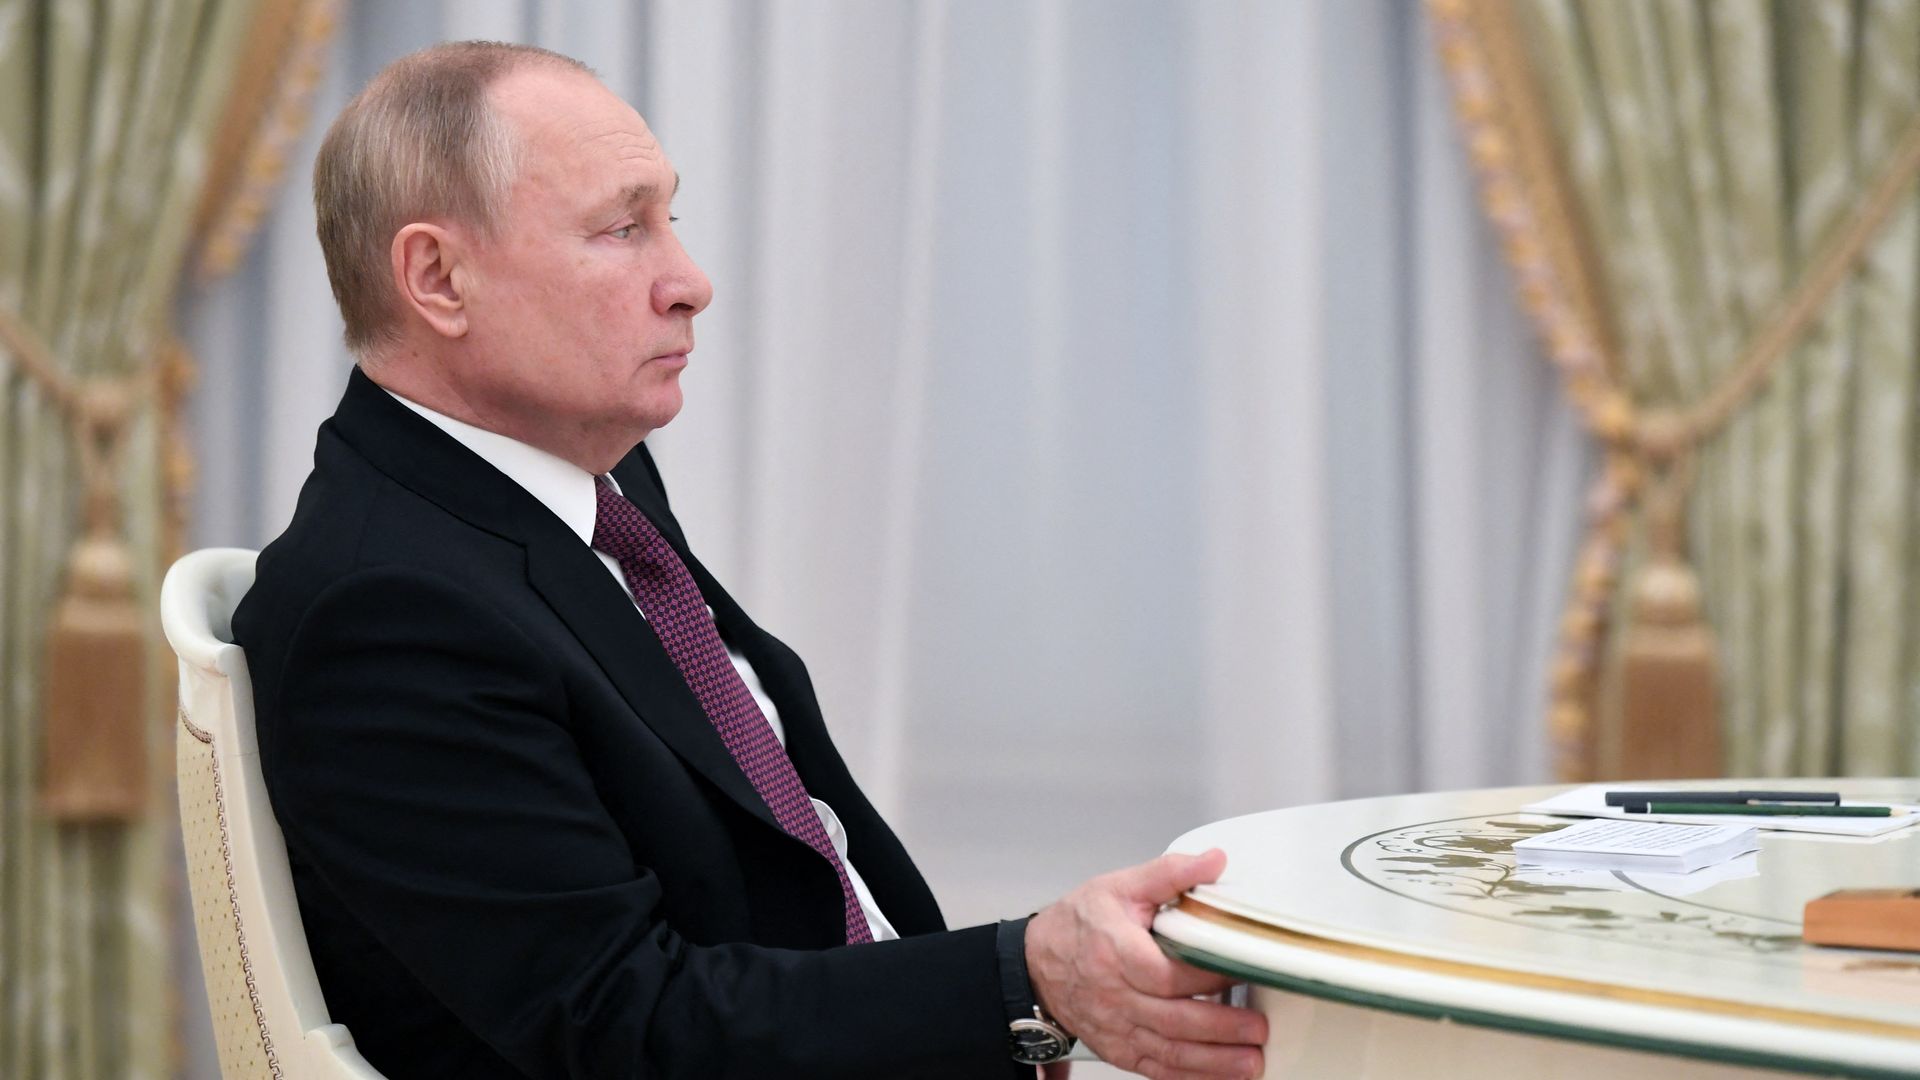 Vladimir Putin sits at a table with his right hand on the edge